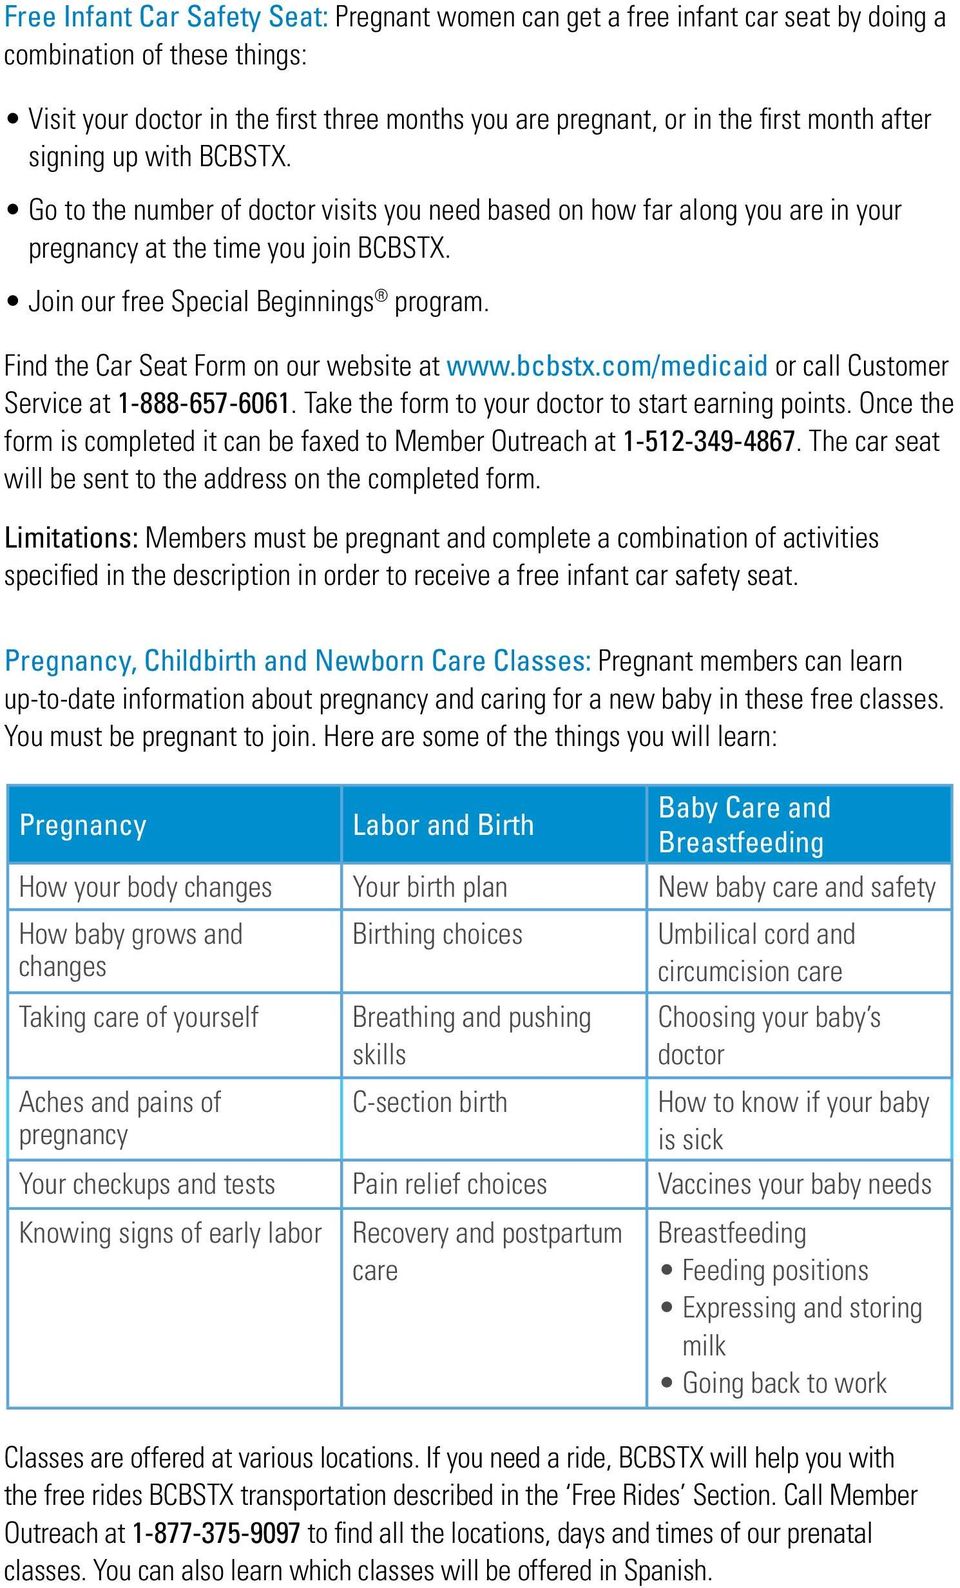 Find the Car Seat Form on our website at www.bcbstx.com/medicaid or call Customer Service at 1-888-657-6061. Take the form to your doctor to start earning points.